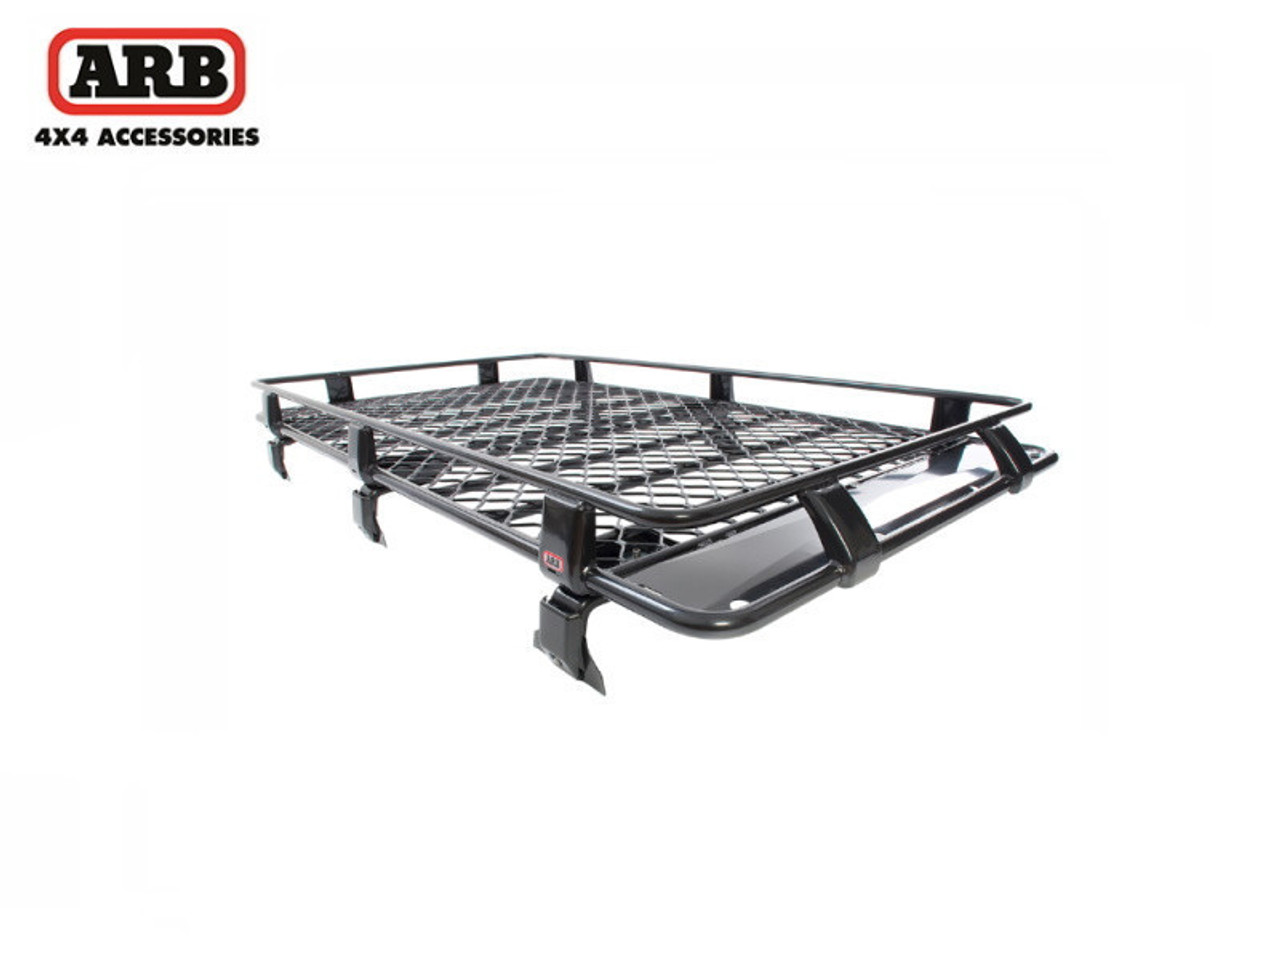 ARB Trade Deluxe Steel Roof Rack With Mesh Floor For Defender - 3800110M